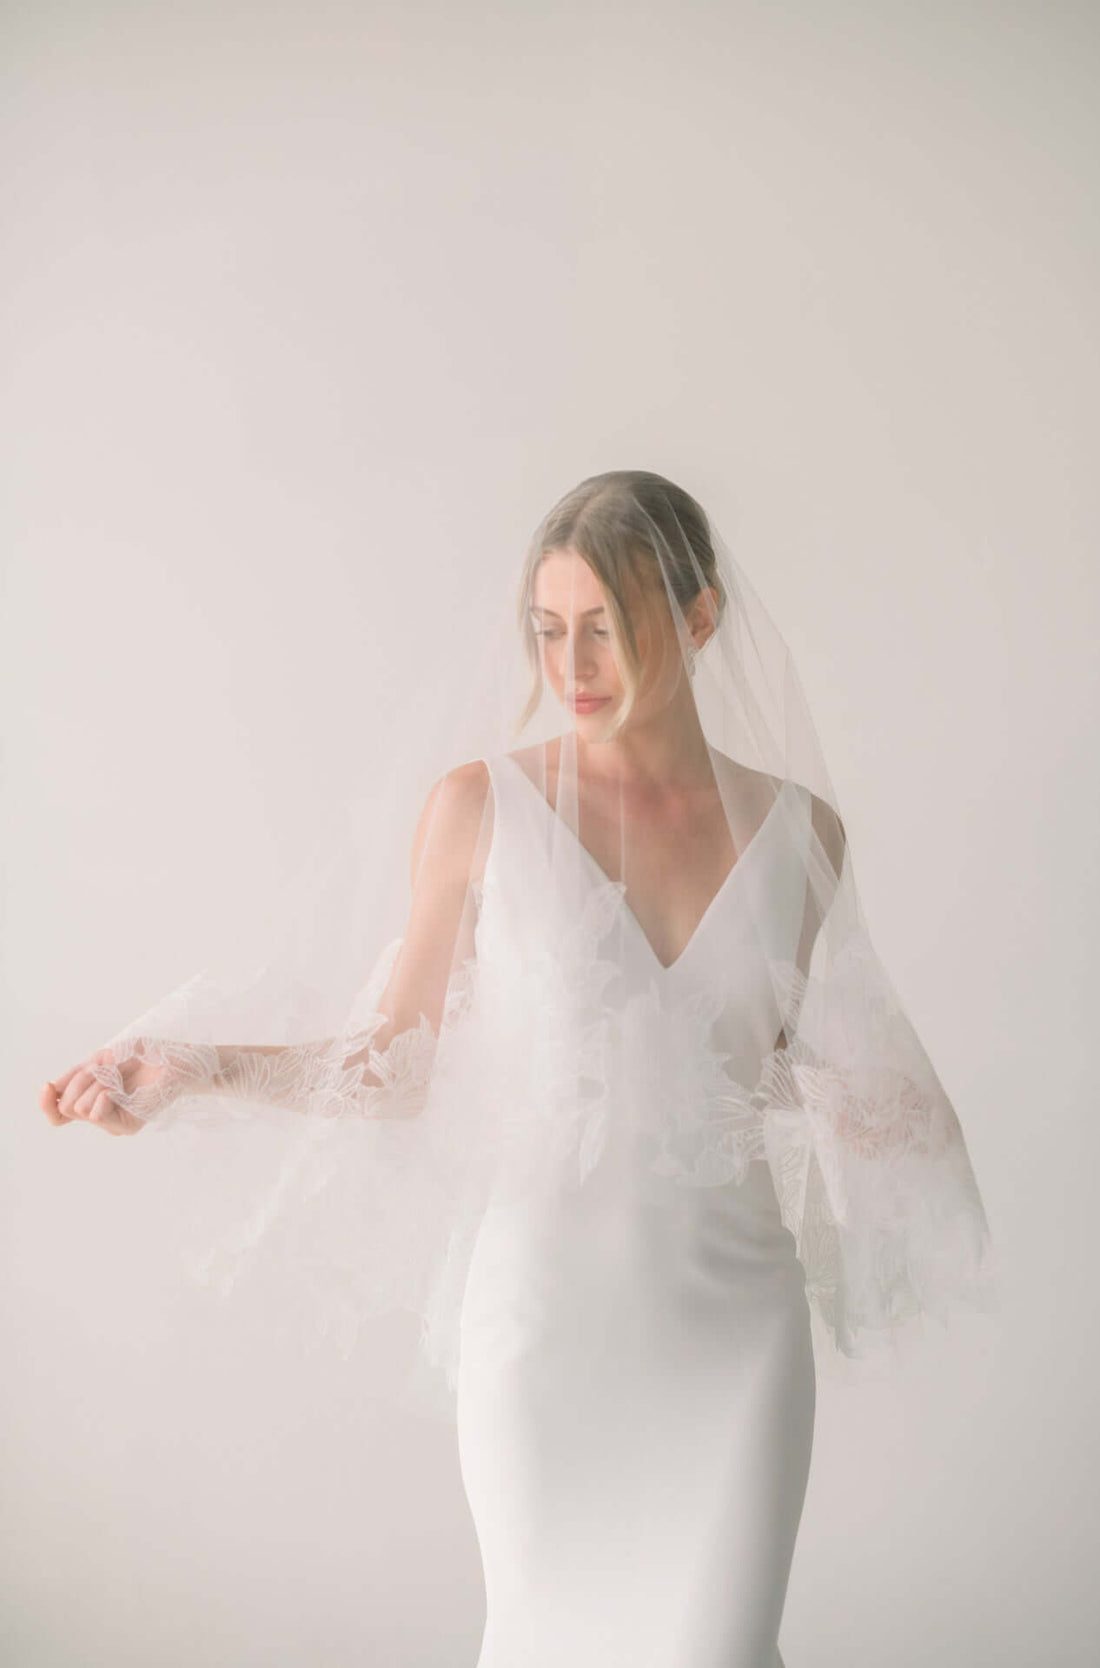 What are different veil styles?